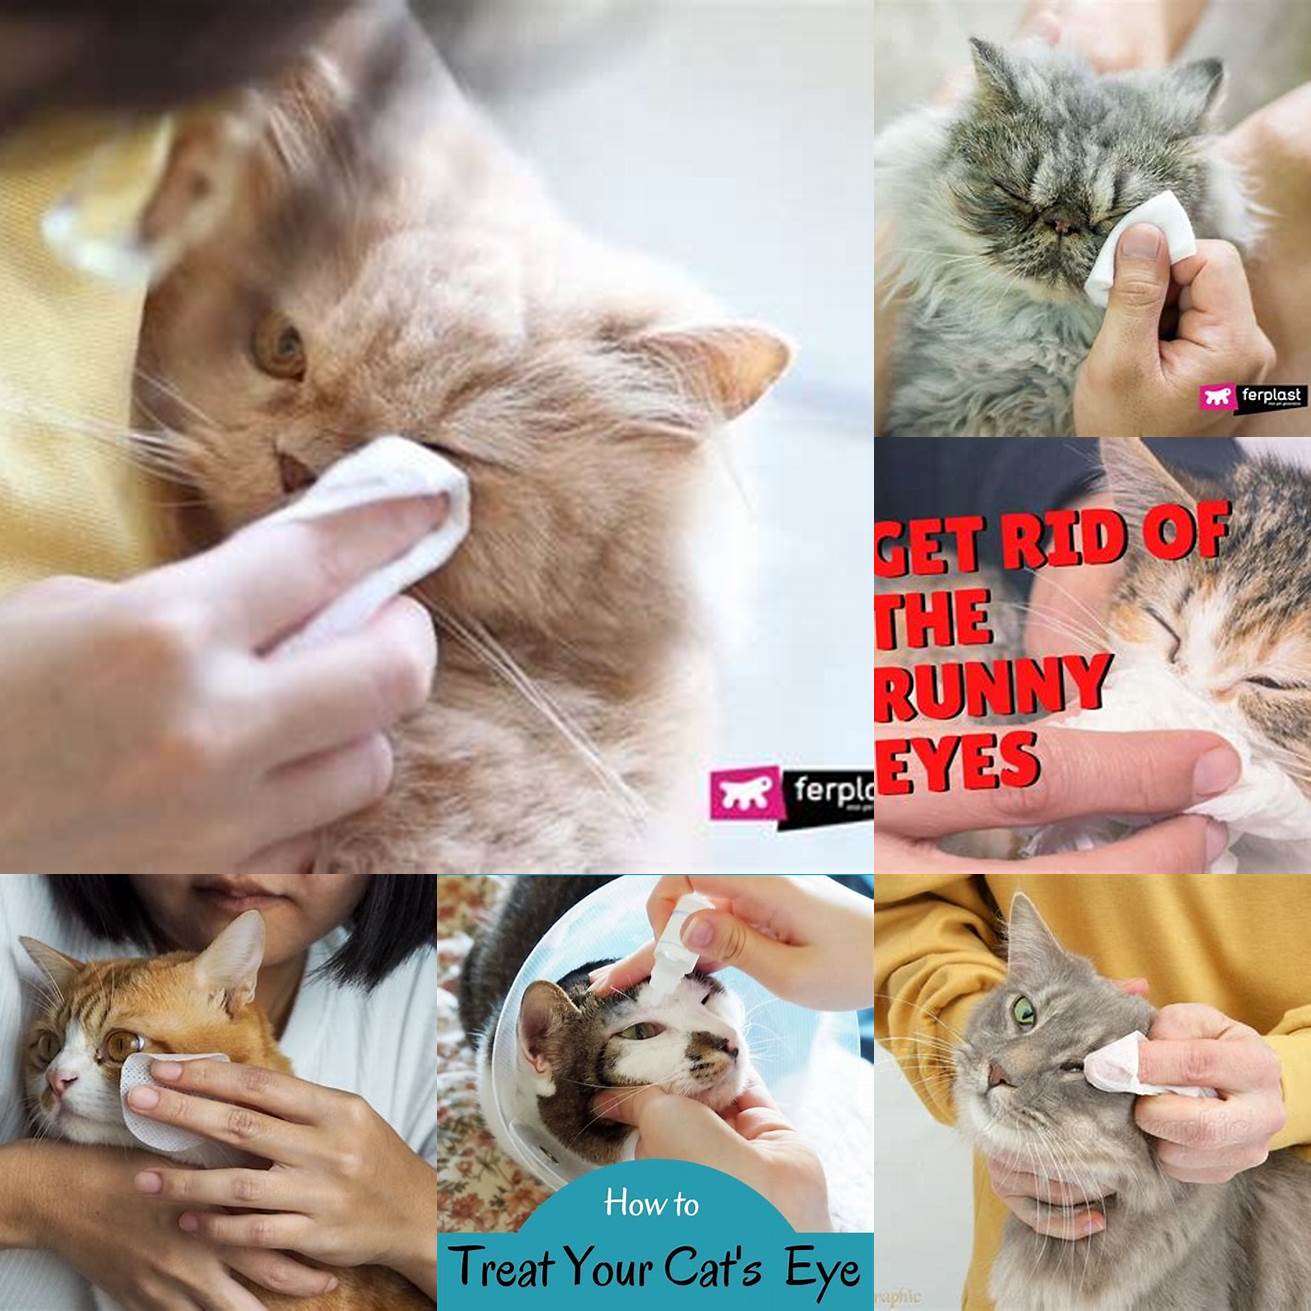 Cleanliness Keep your cats eyes clean by wiping them with a damp cloth or cotton ball